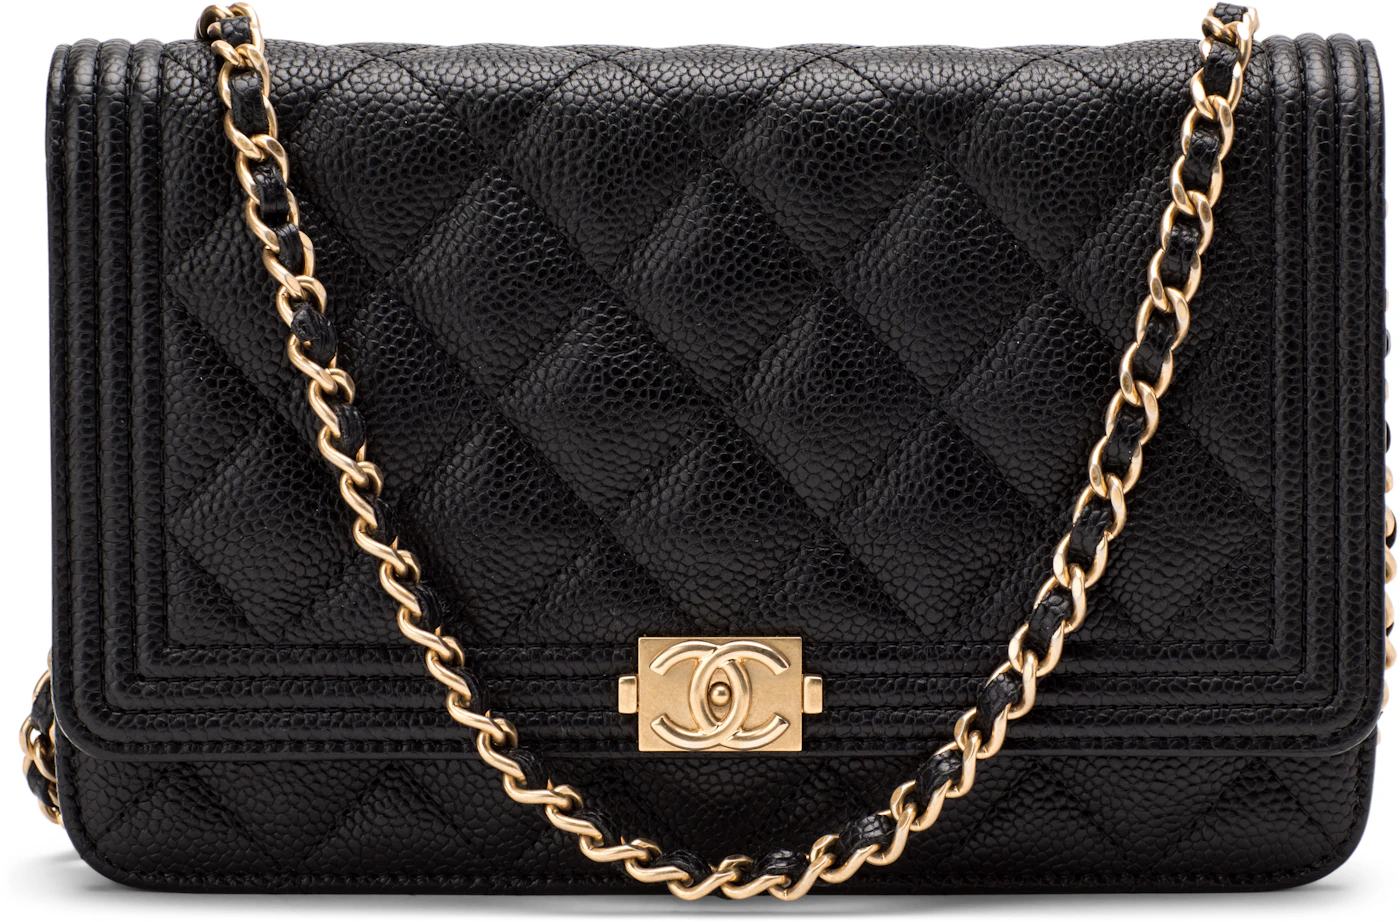 Black Chanel panache Quilted Boy Wallet On verniciata Crossbody Bag, RvceShops Revival